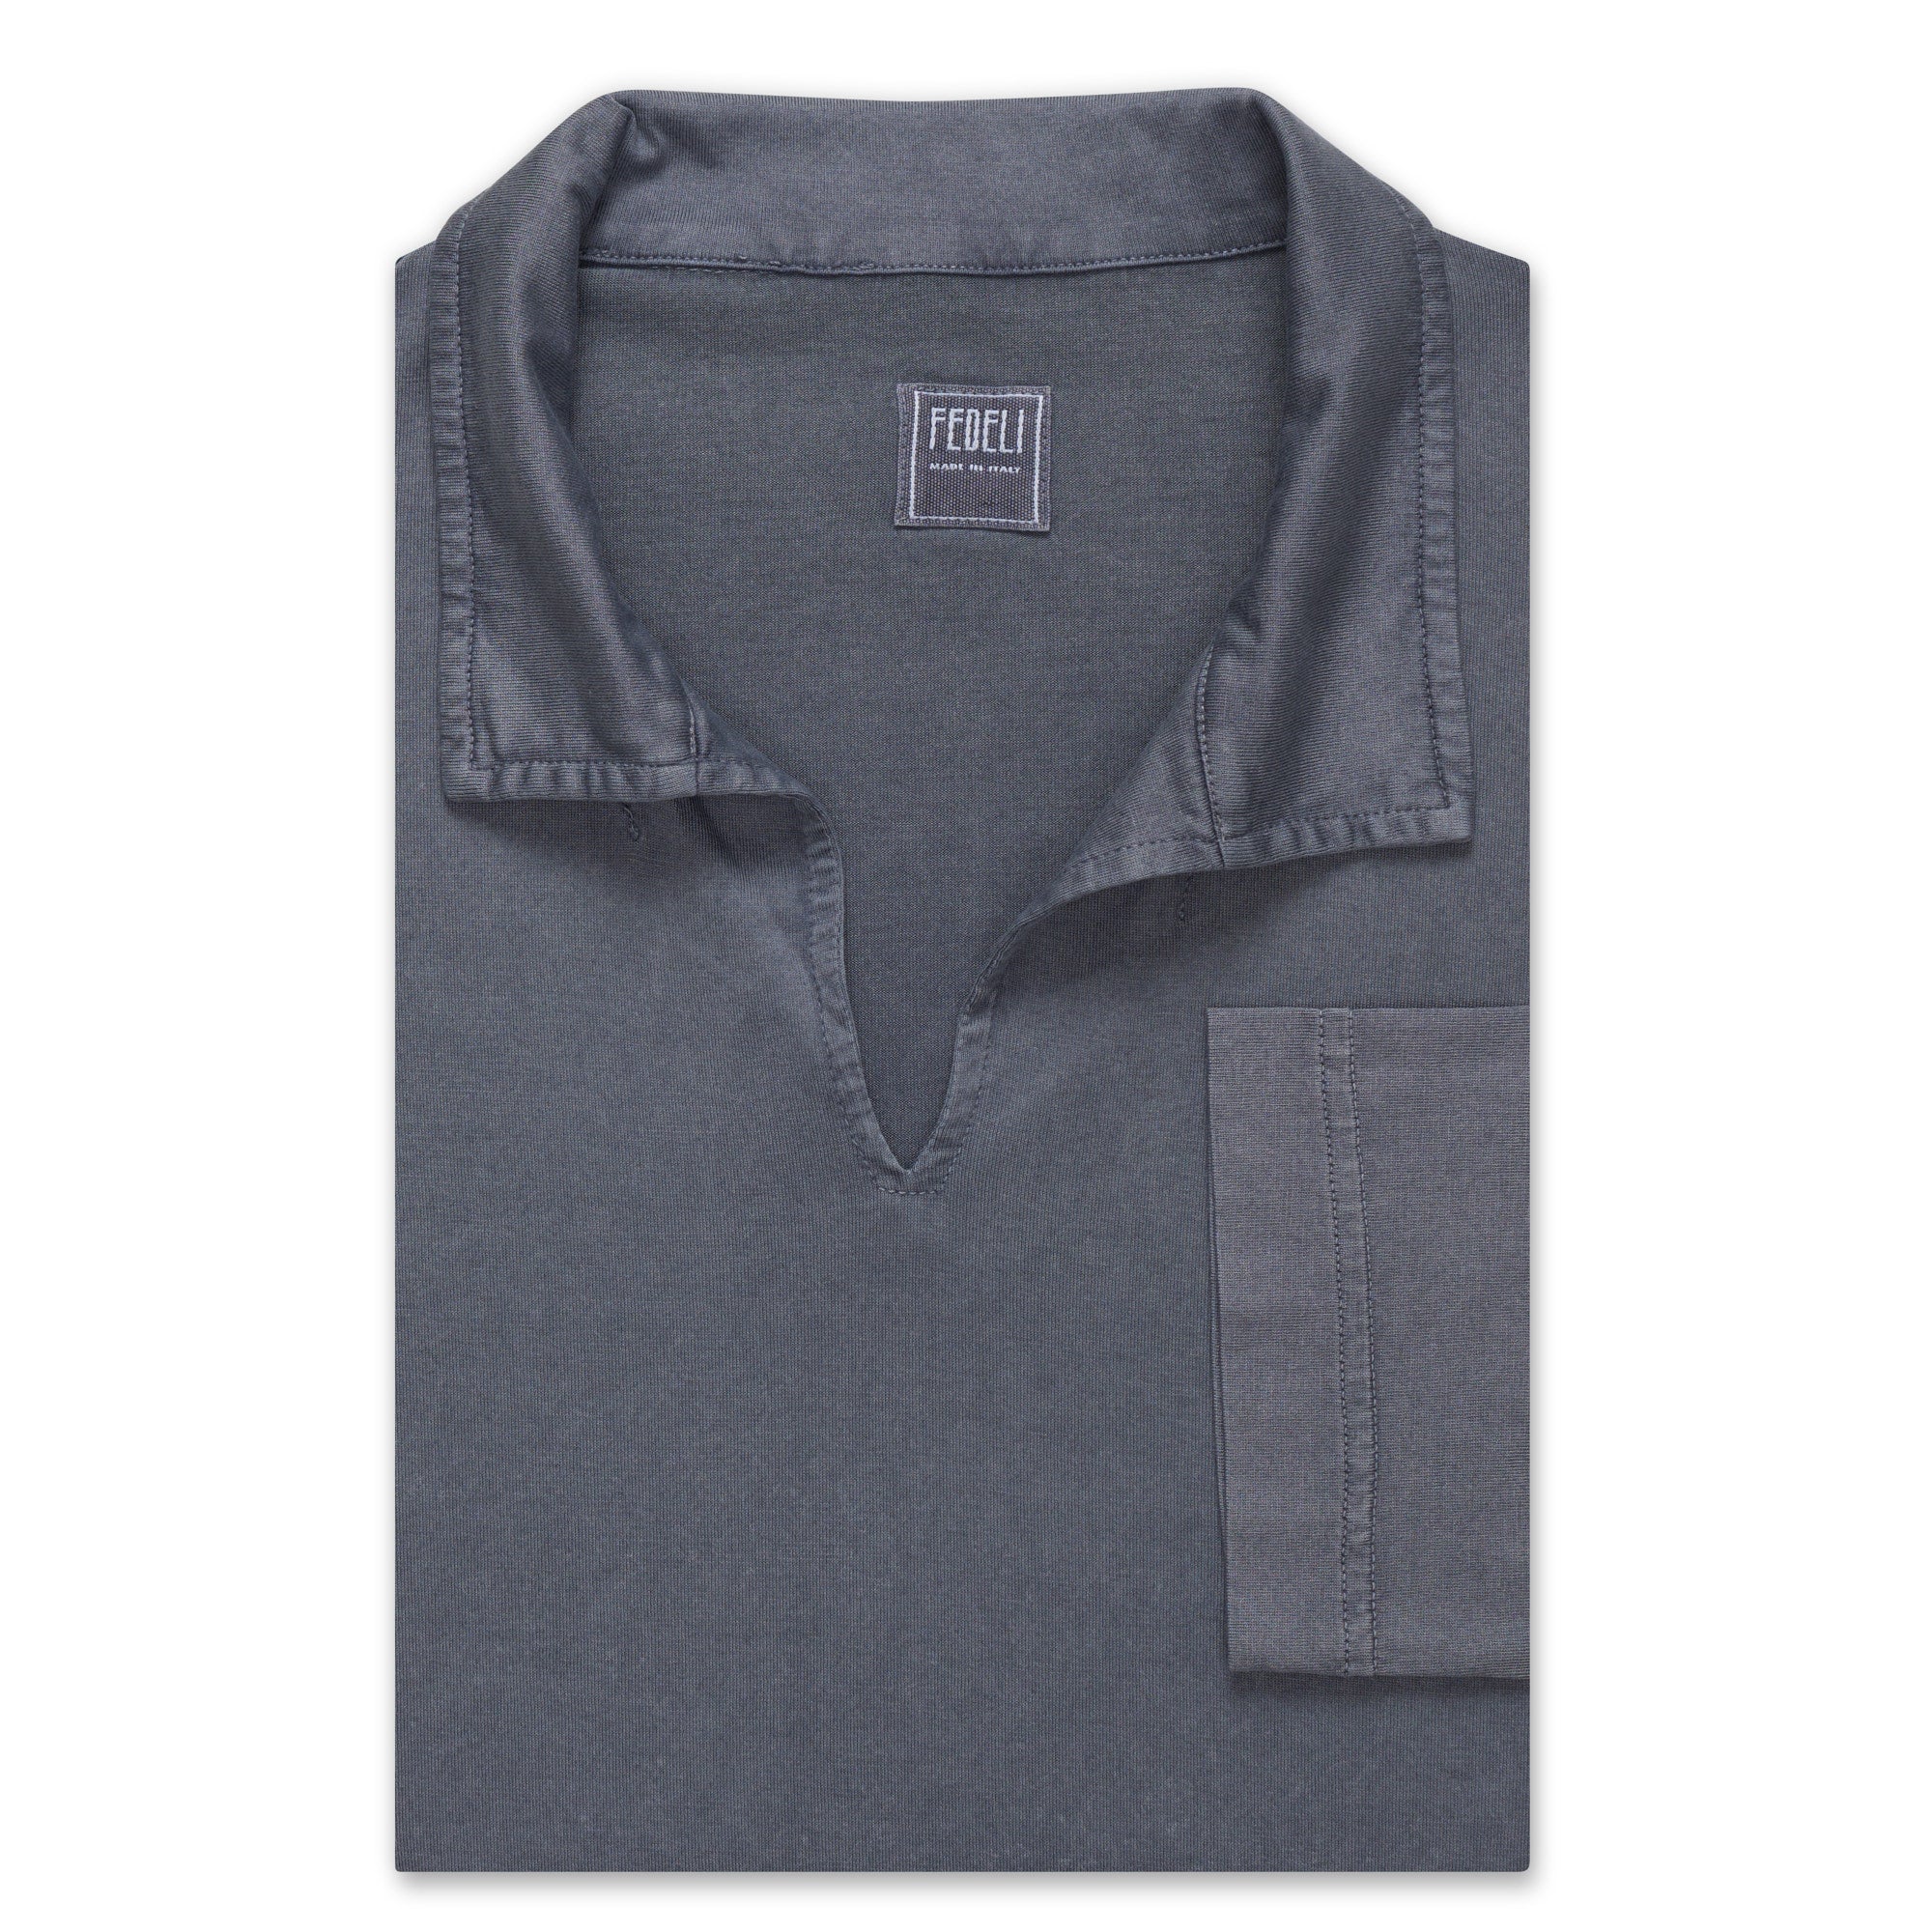 FEDELI "Peter" Solid Gray Cotton Light Jersey Long Sleeve Polo Shirt 56 NEW US 2XL